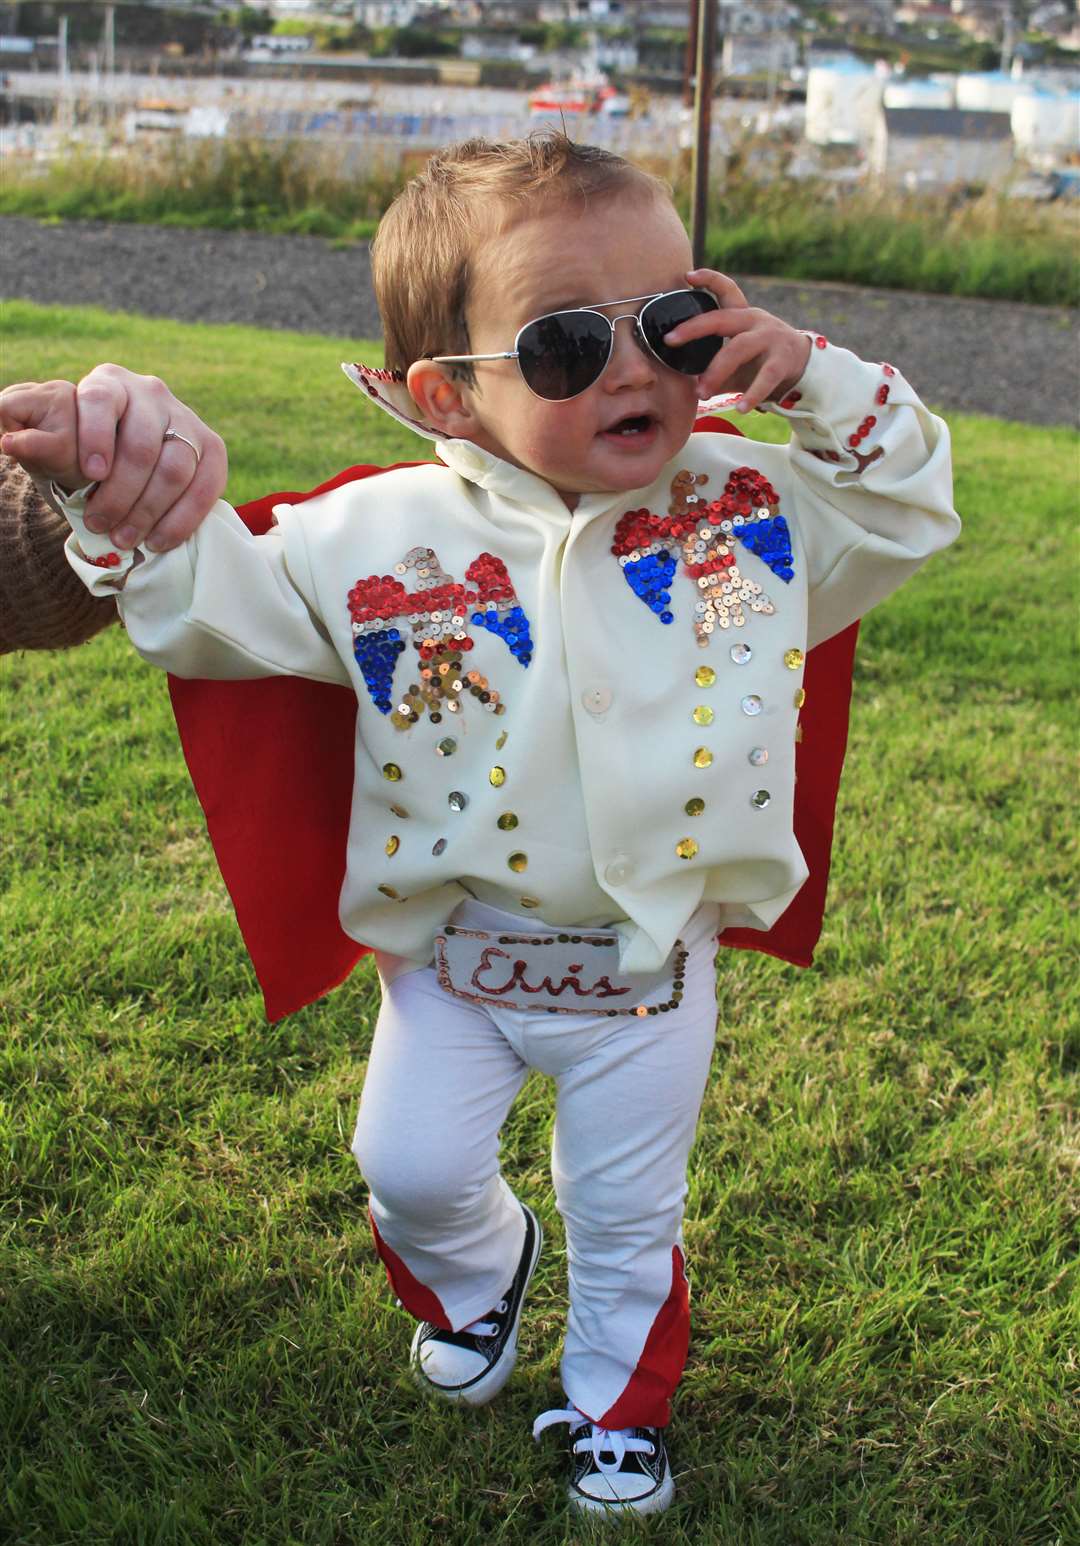 Little Elvis, one-year-old Rayen Amin, was the King of the fancy-dress parade and took first prize for his age group.